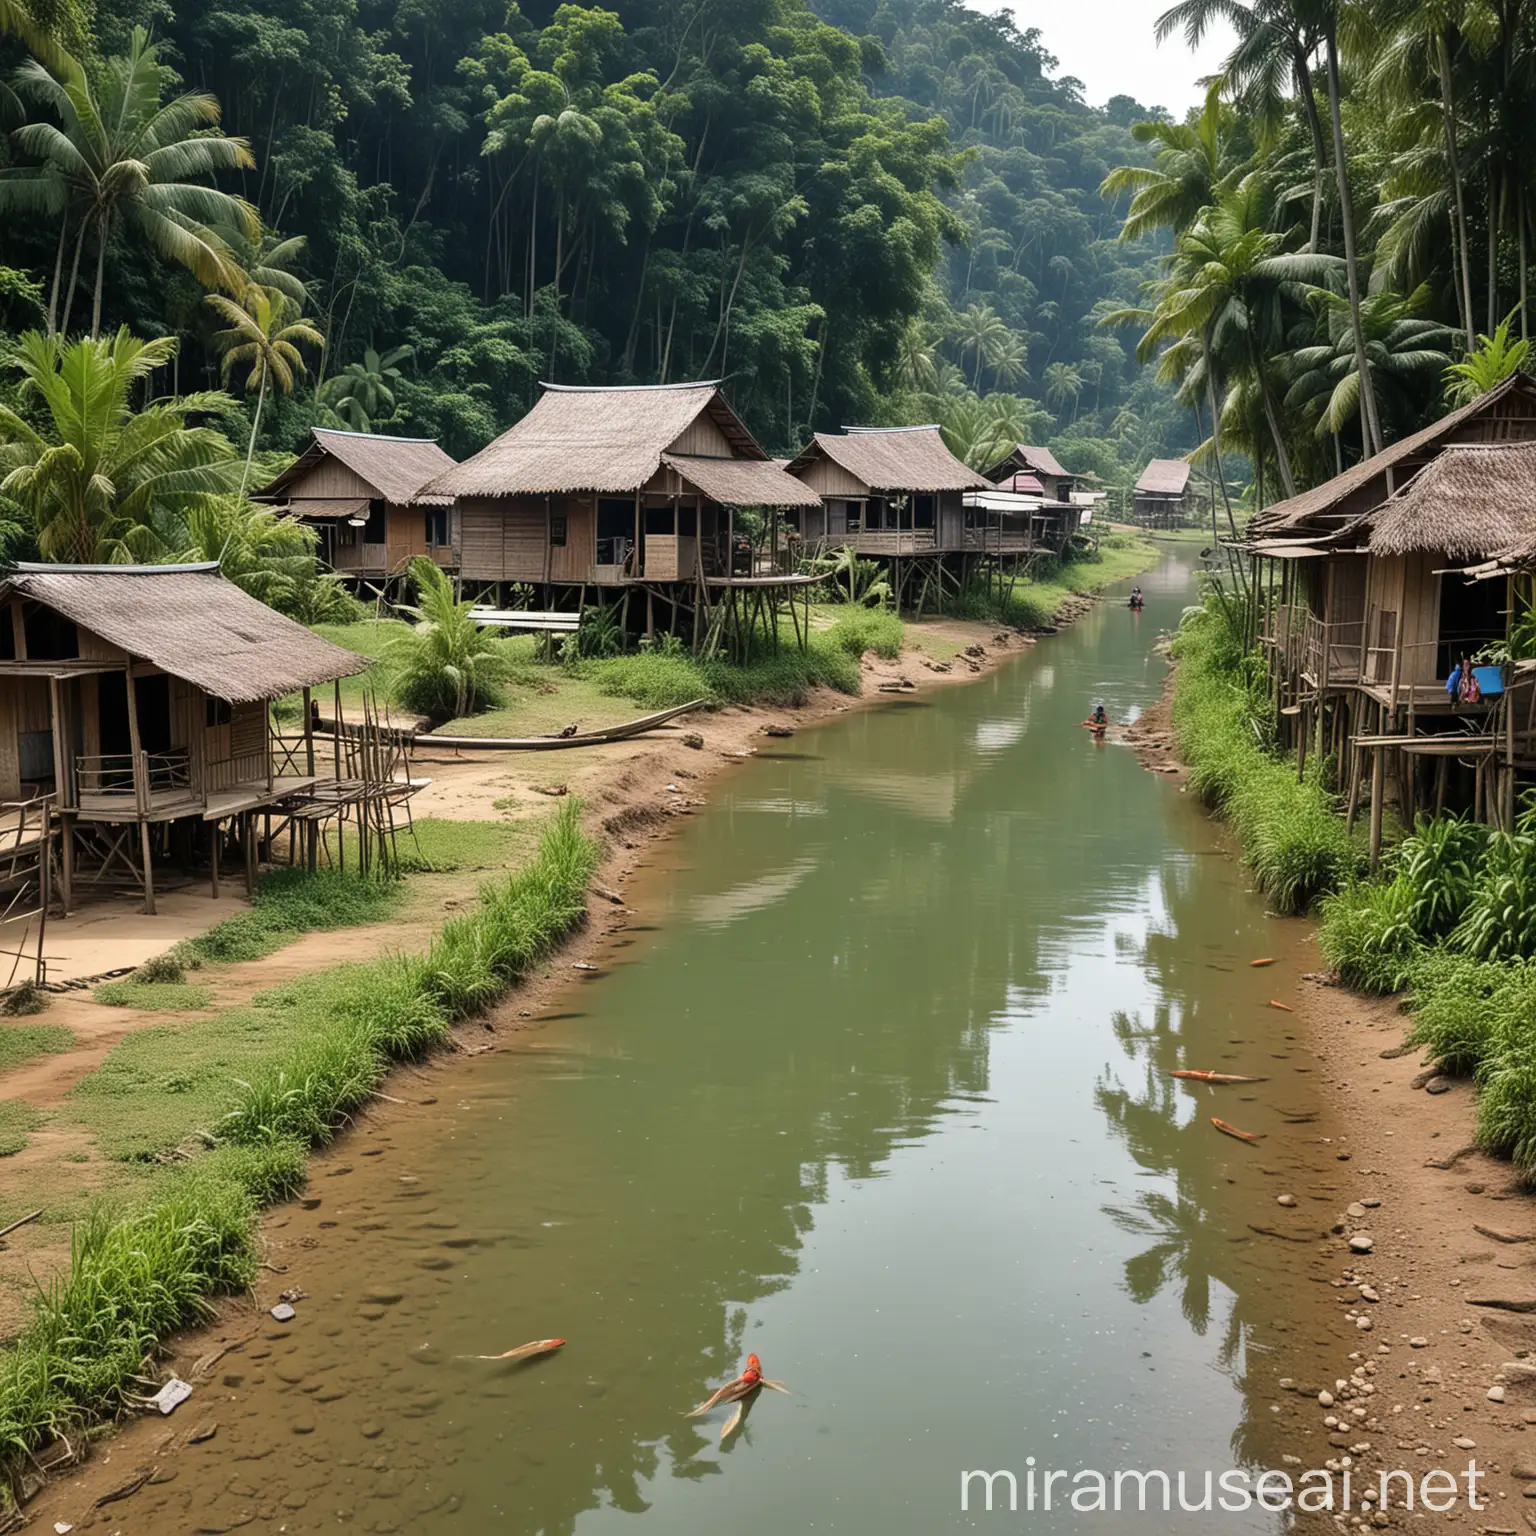 Malay style village, belong it have river, river have mother catch fish